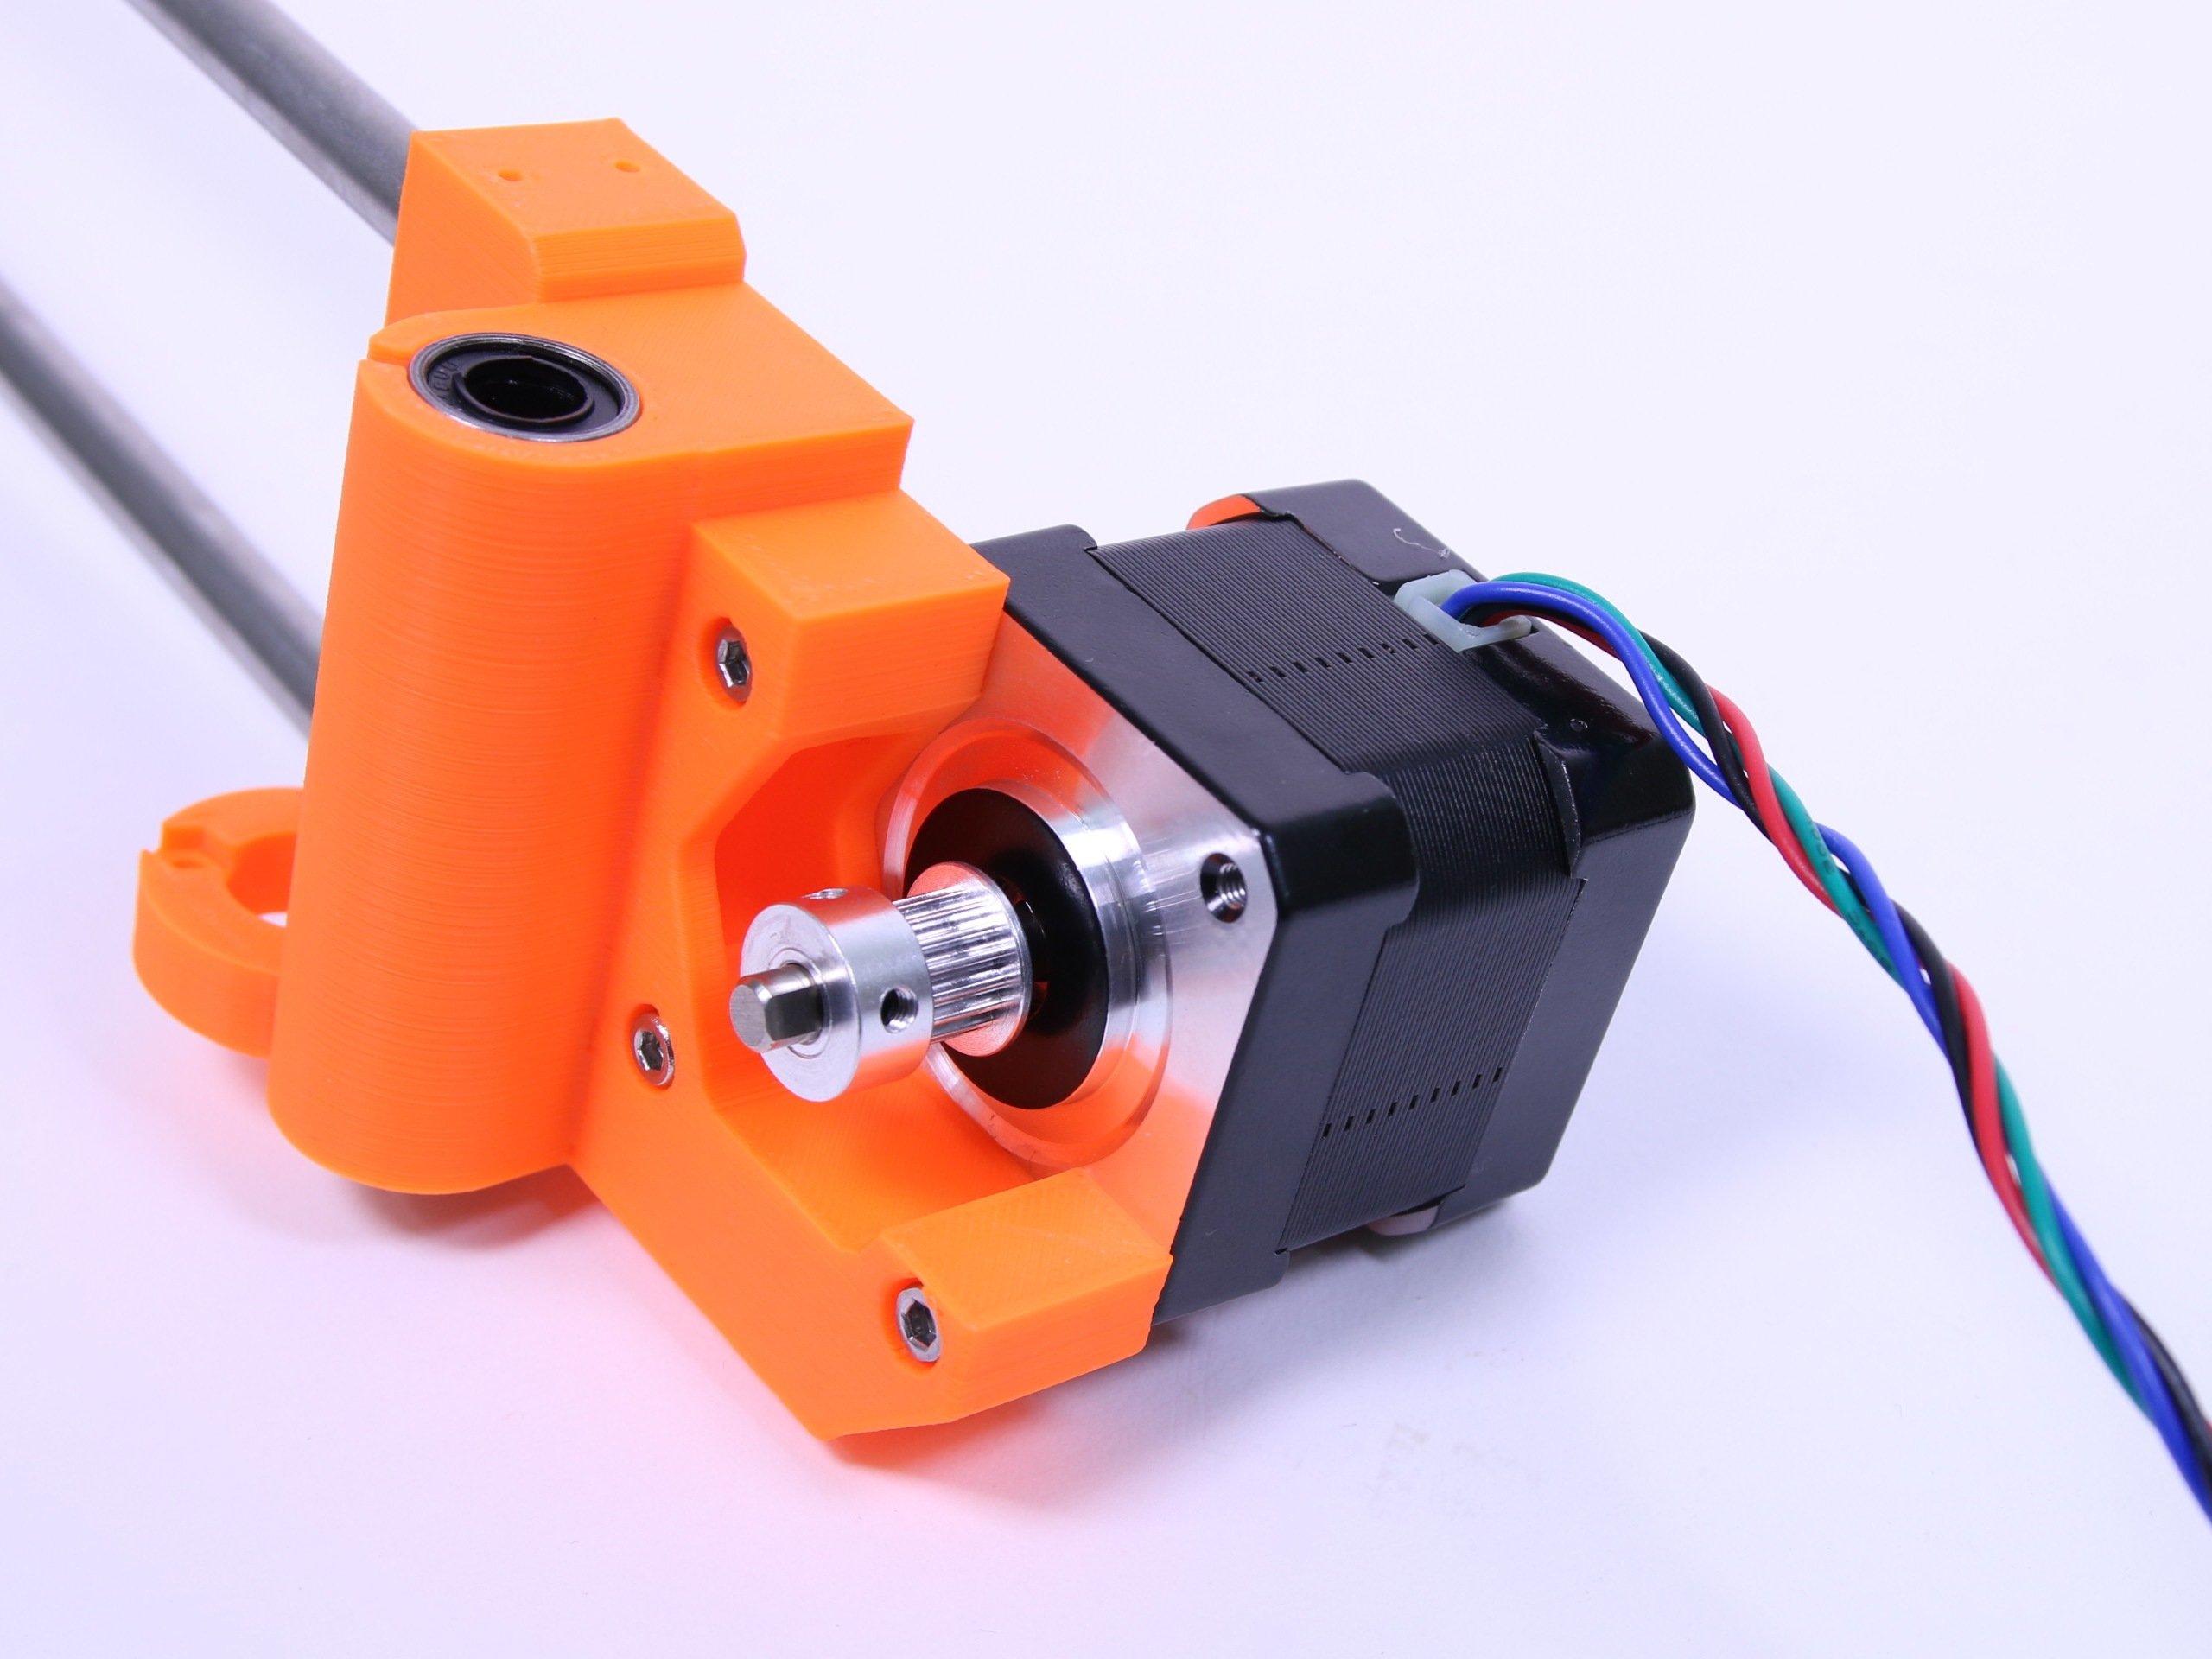 Assemble the X-motor pulley